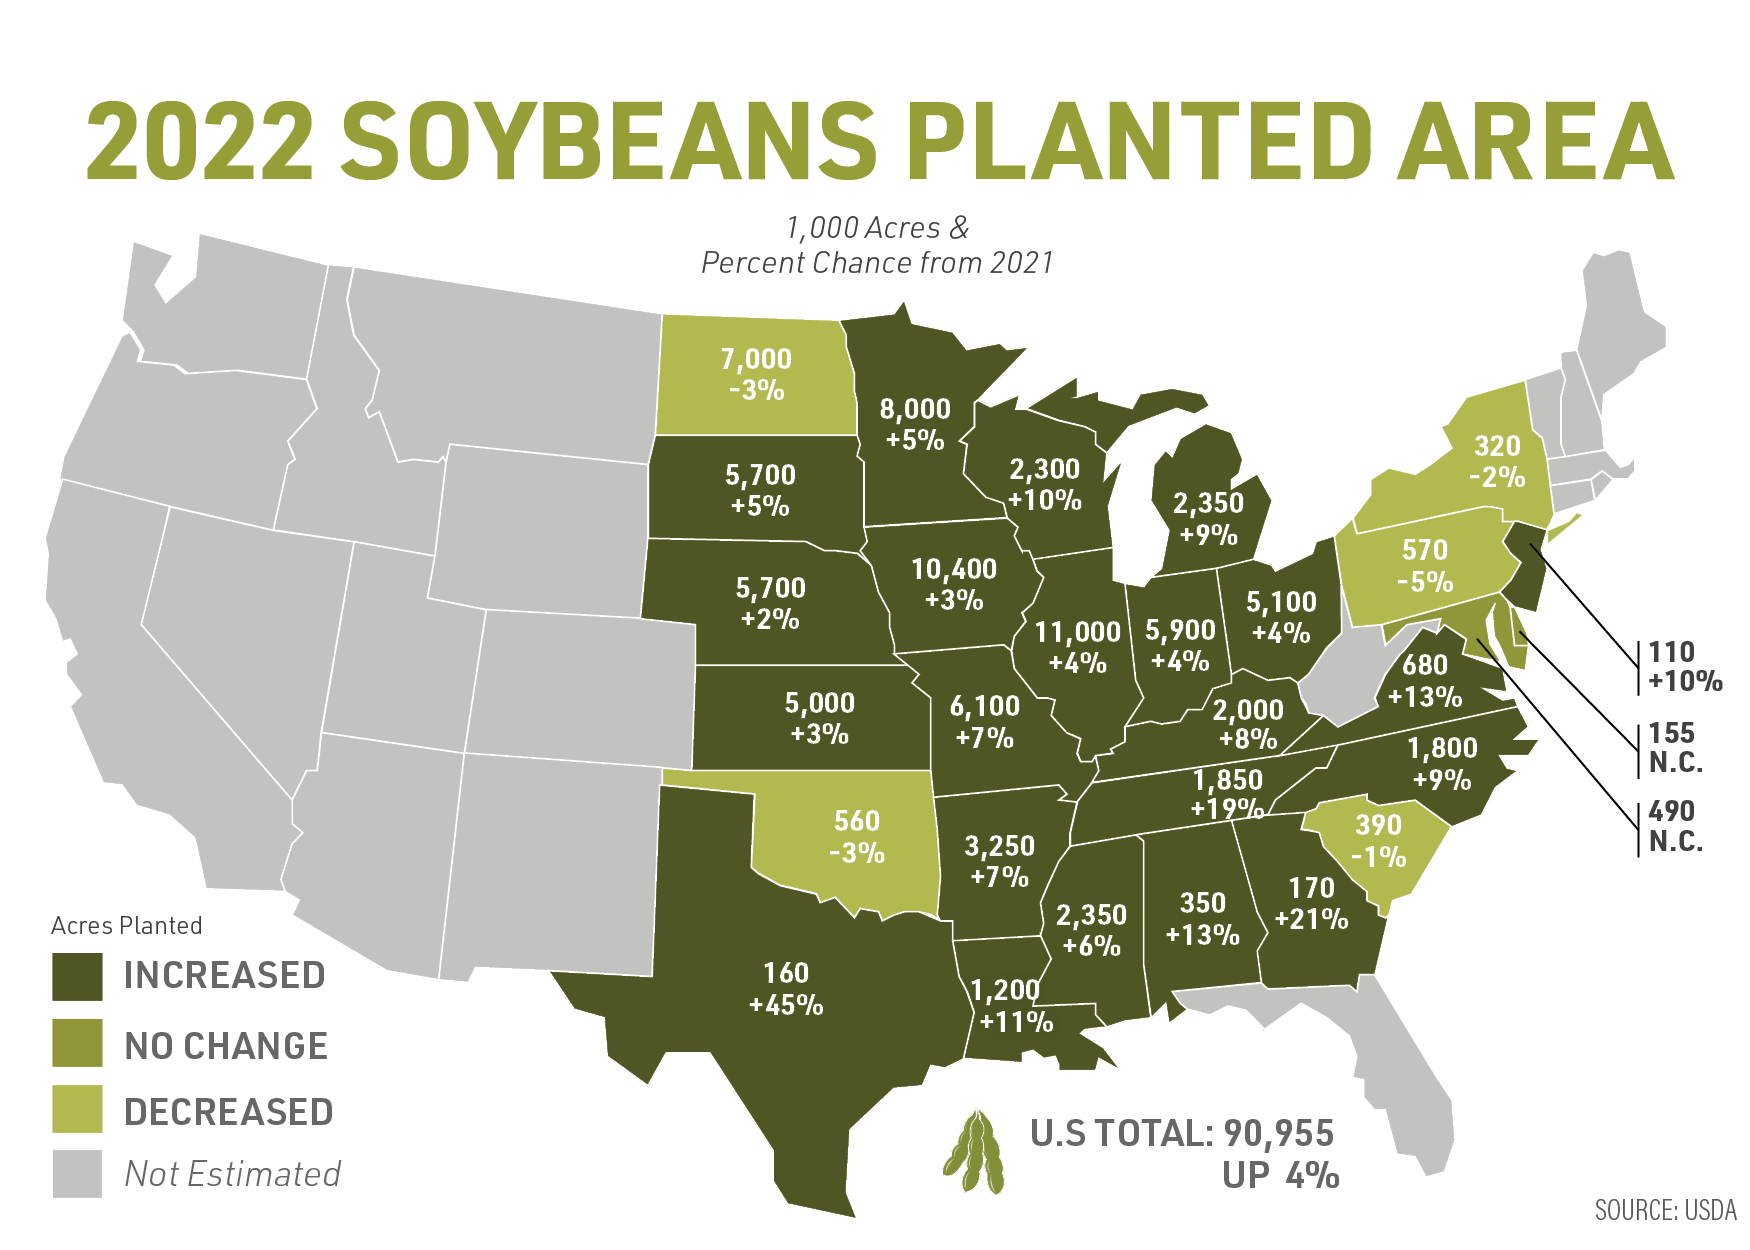 USDA Report 2022 - Soybeans